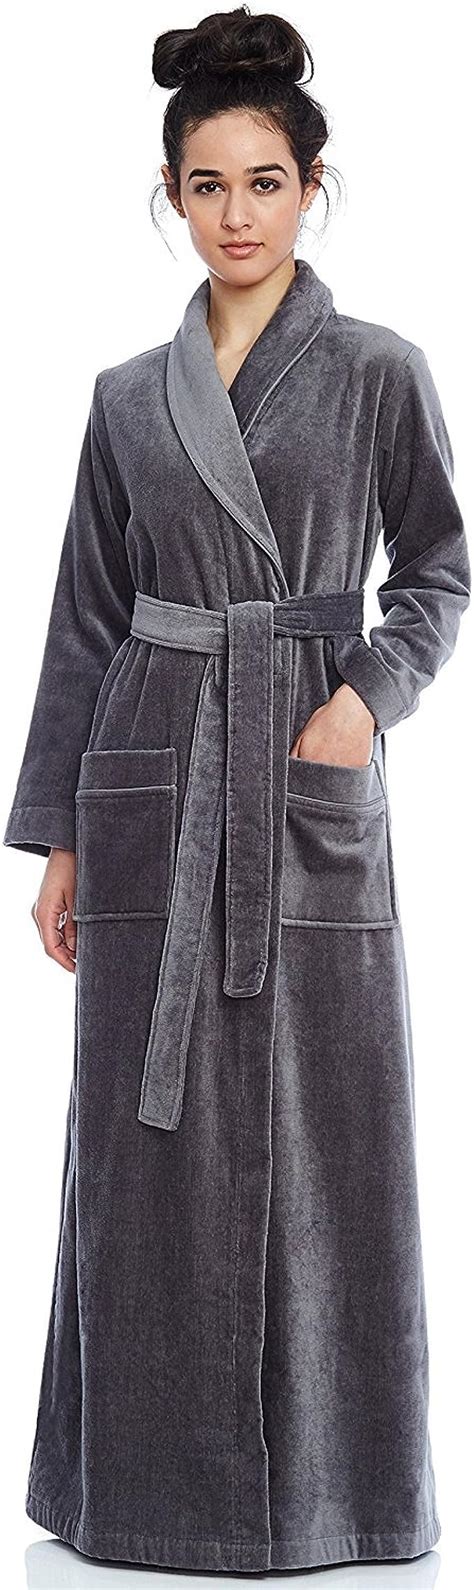 Cinderella Long Women S Terry Cotton Bath Robe Toweling With Belt